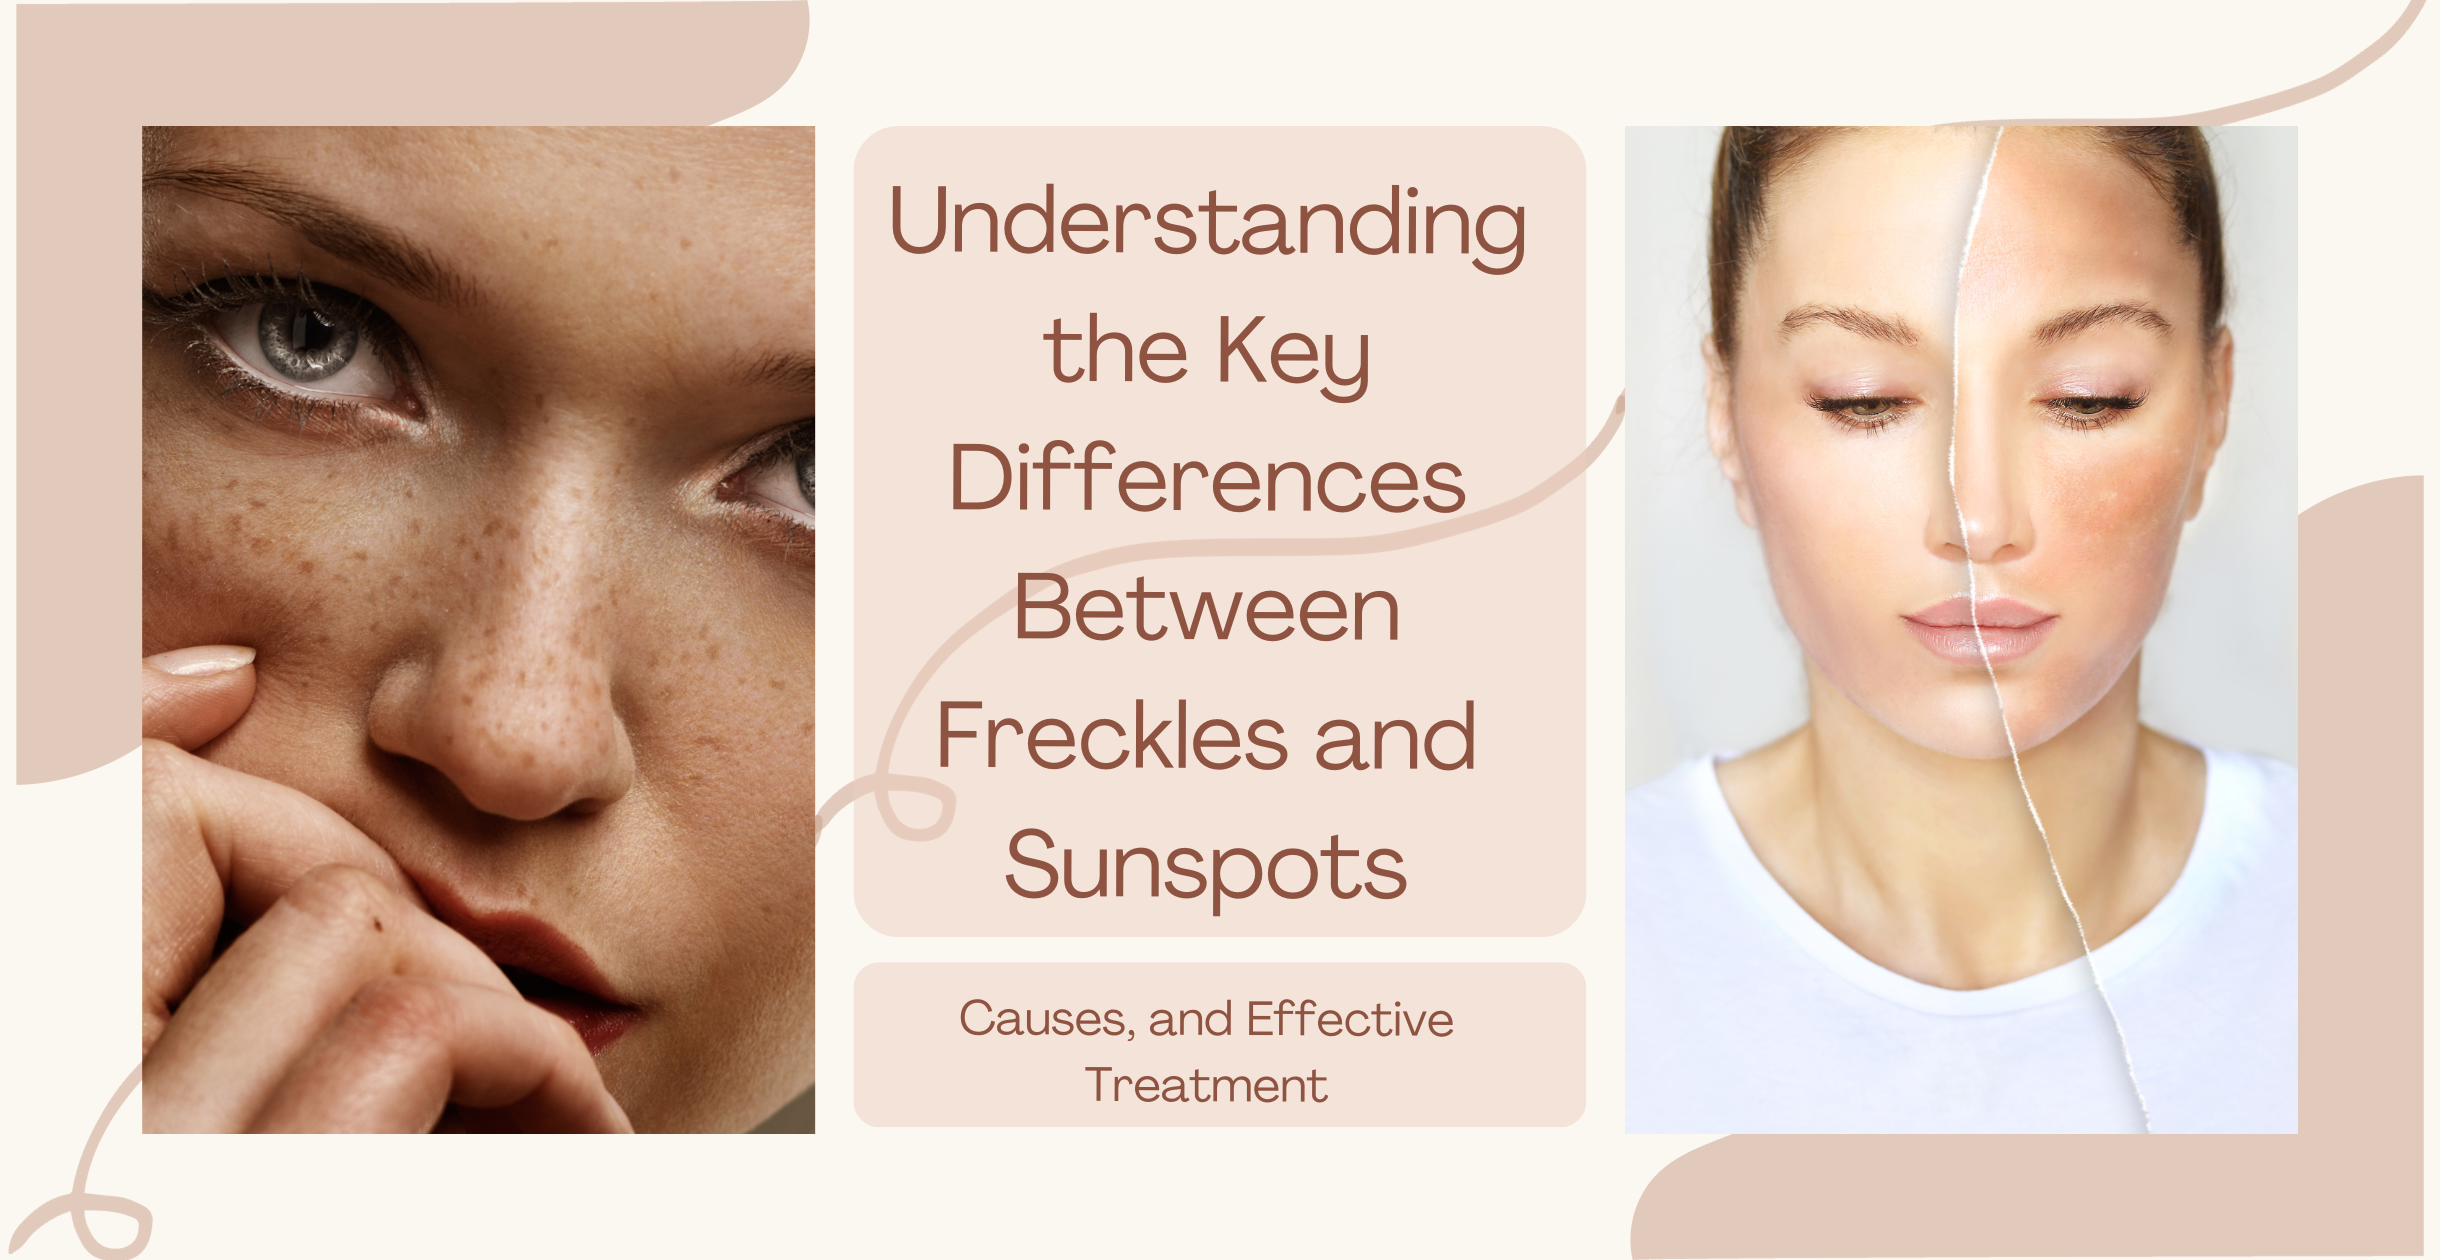 Understanding the Key Differences Between Freckles and Sunspots